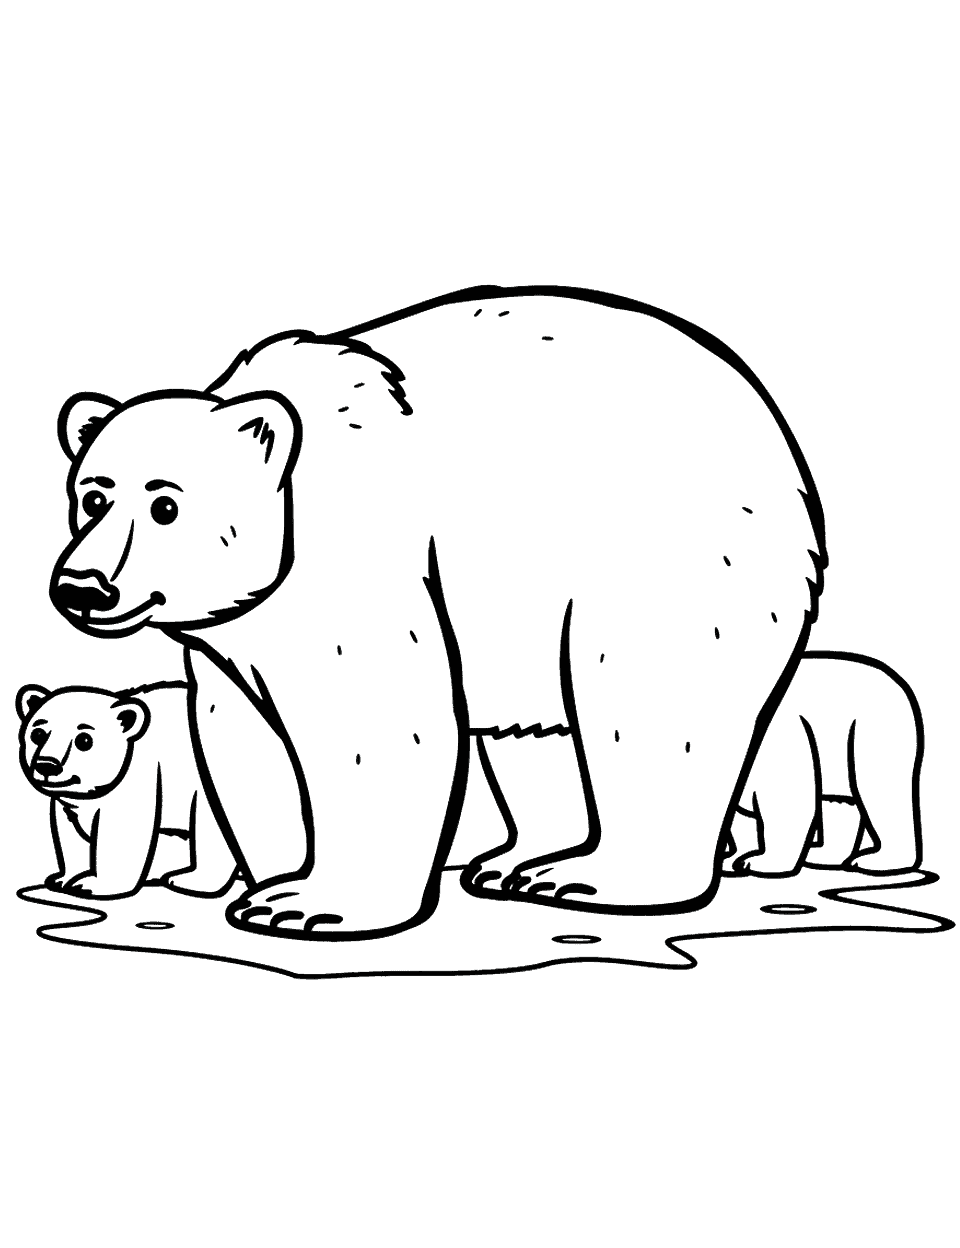 Polar Bear Family Coloring Page - A mother polar bear with two cubs walking together.